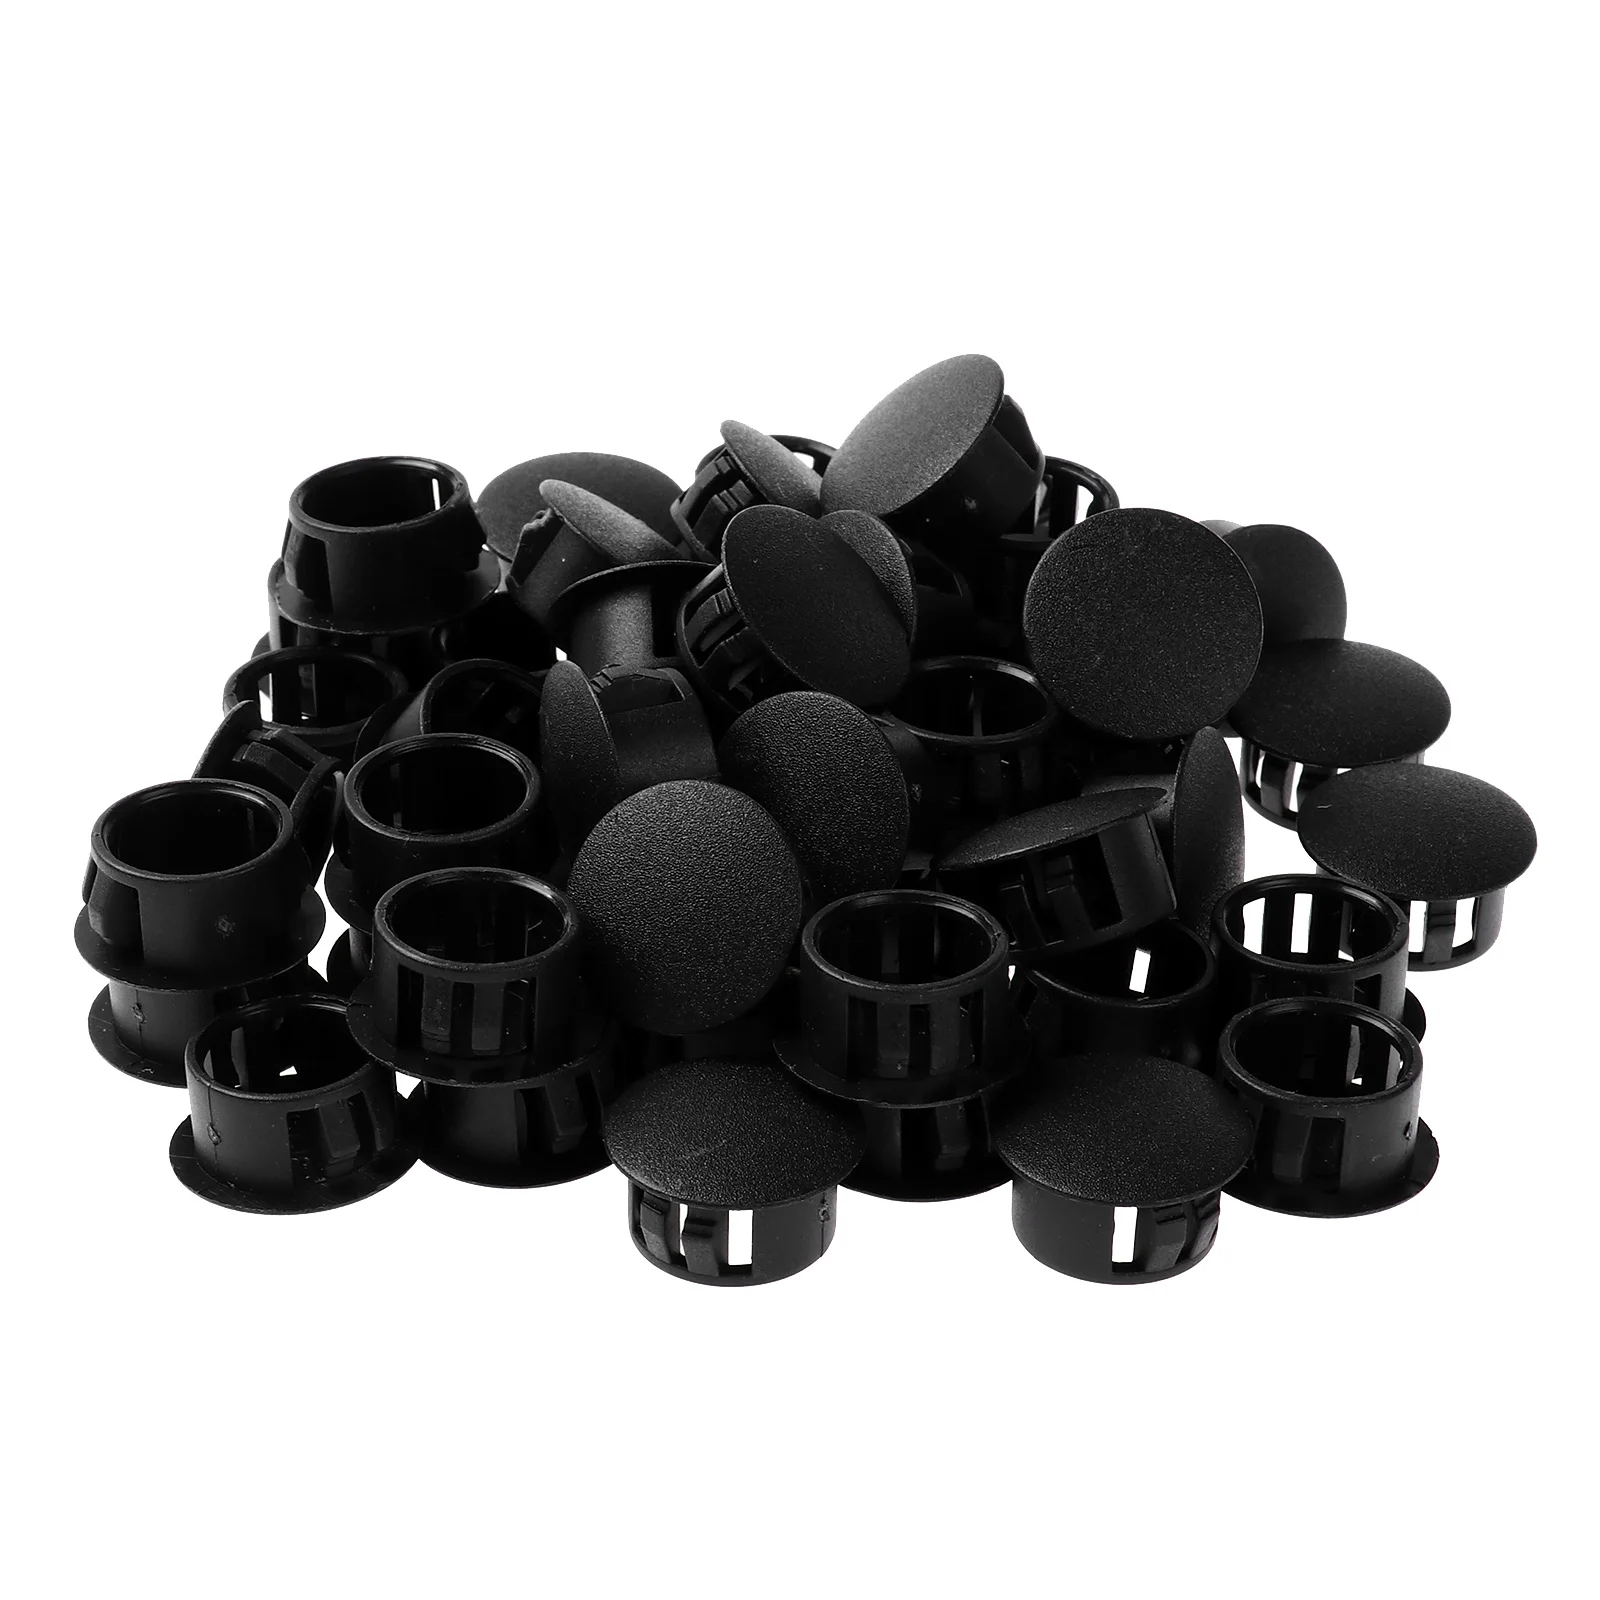 Details about   50Pcs  Plastic Hole Plug Snap-Type Screw Caps Cover for Furniture Tube Chair Leg 